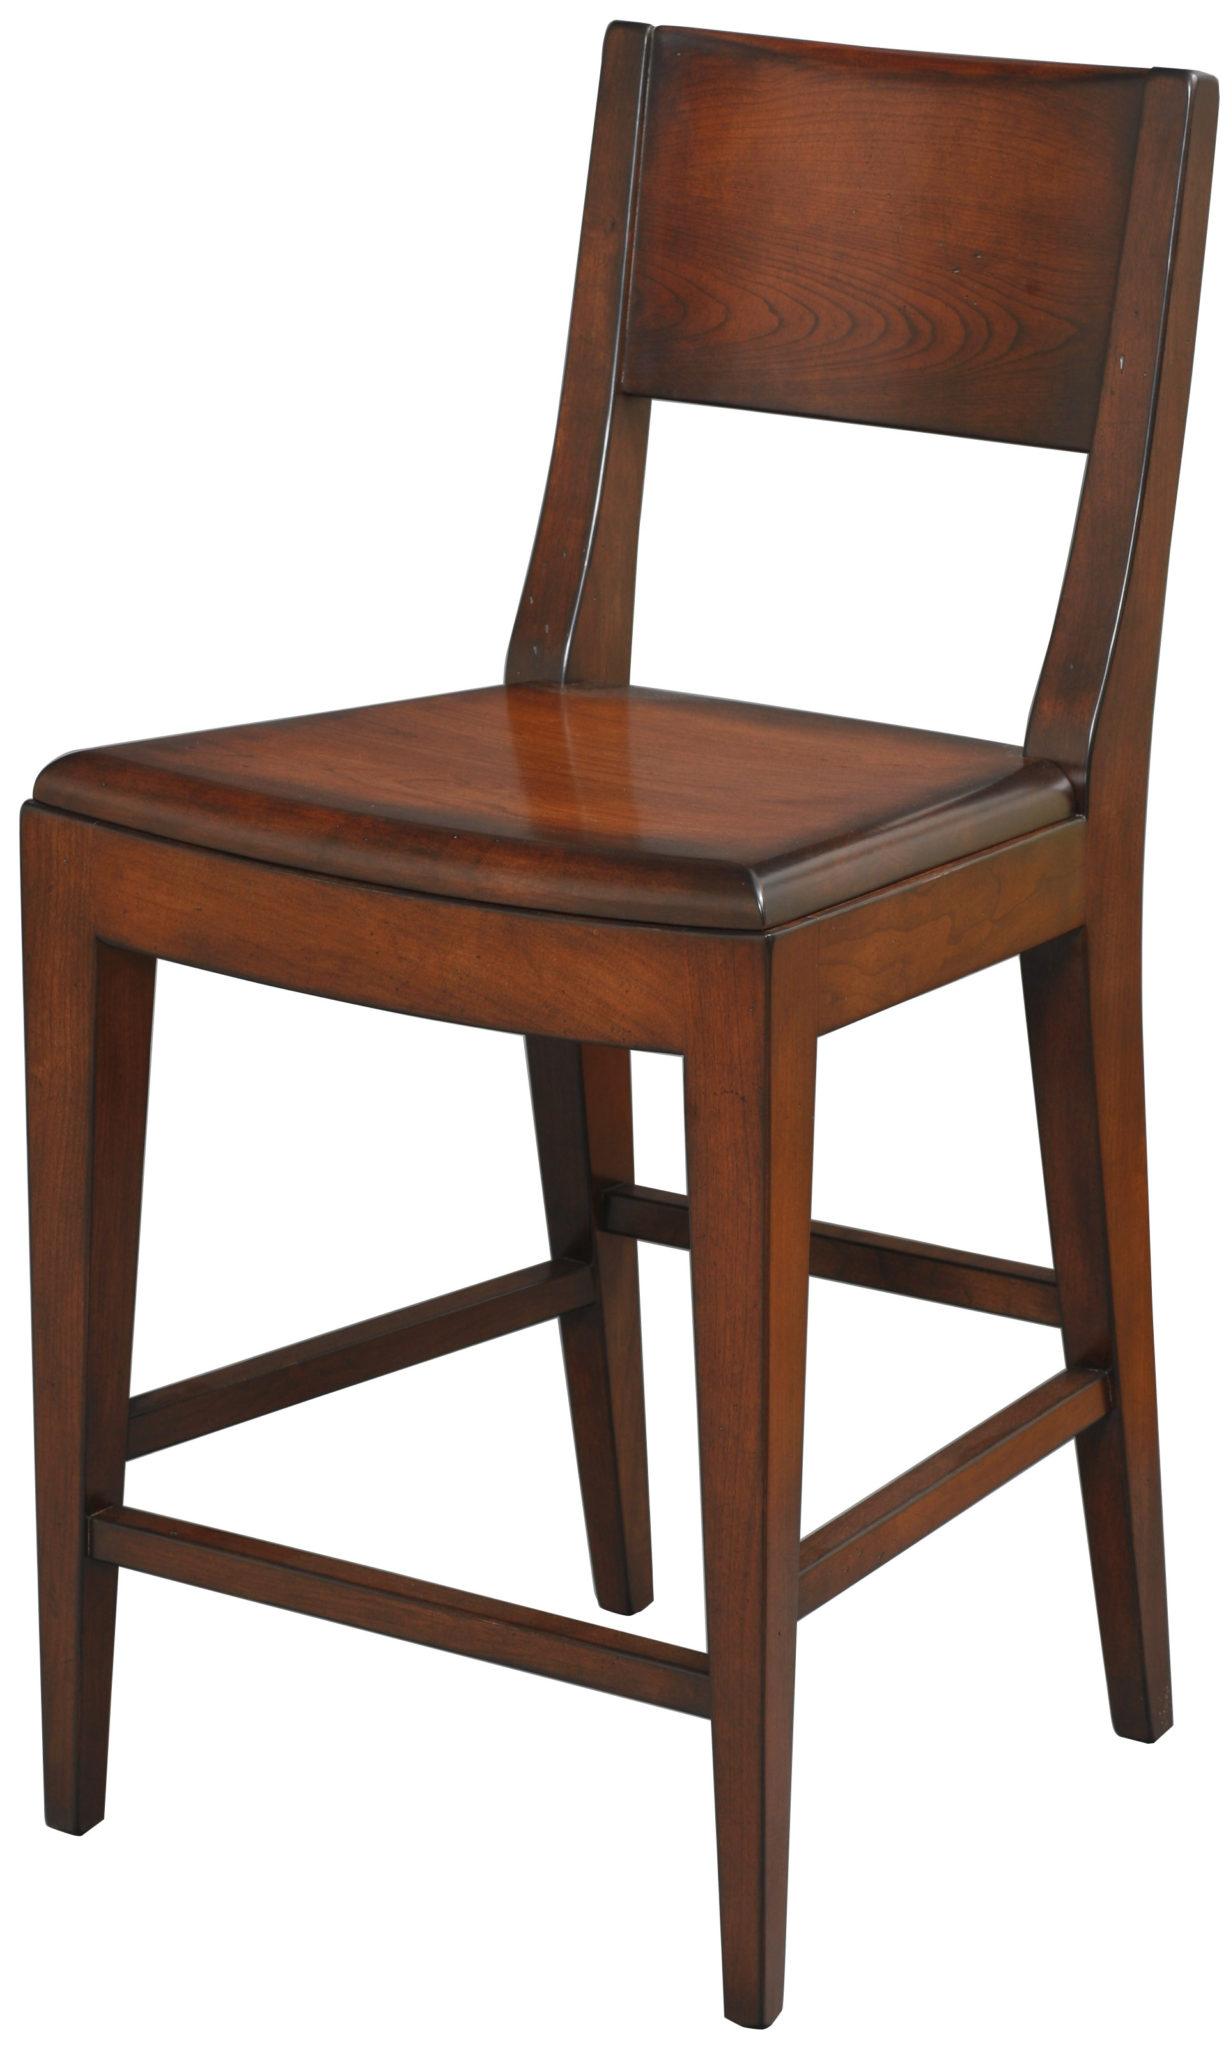 Counter Stools | Great Windsor Chairs